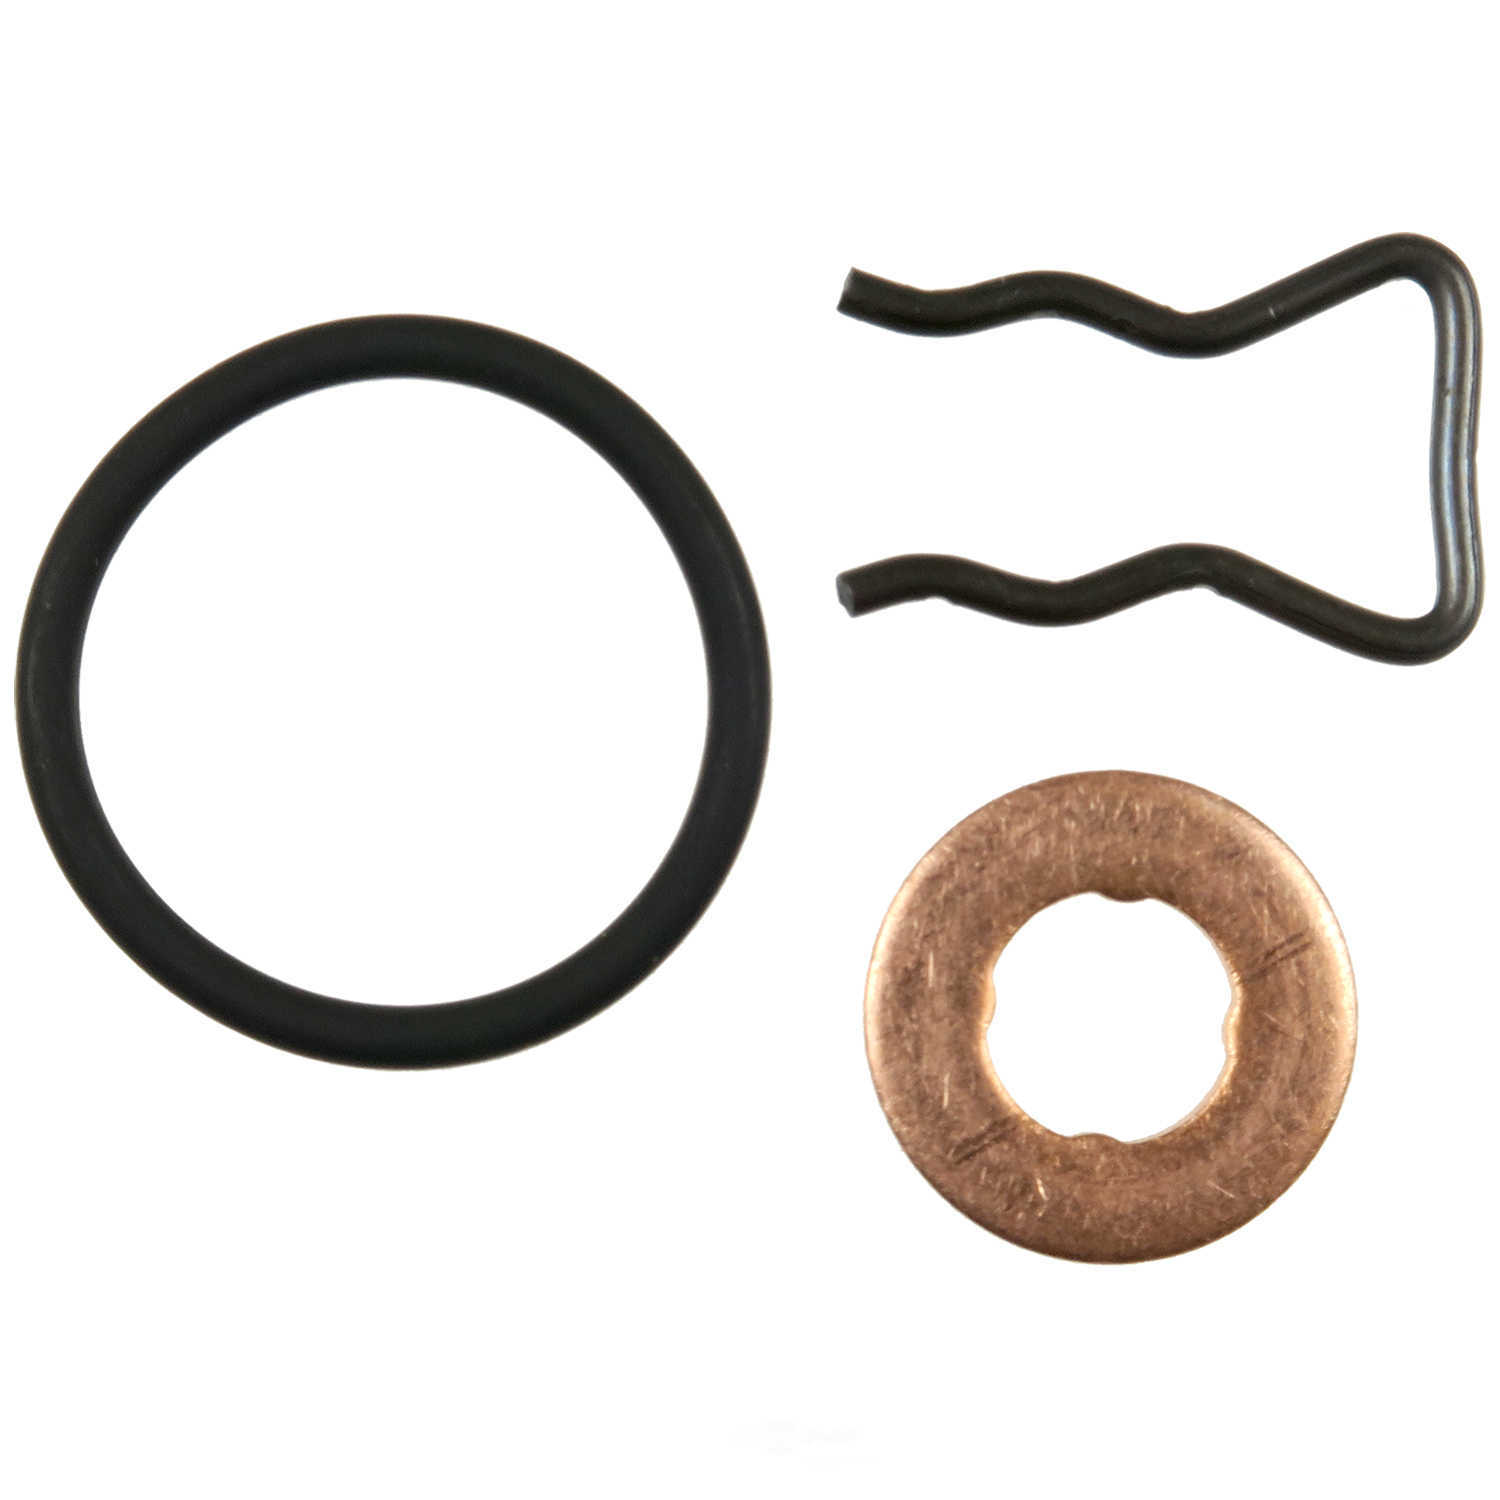 GB REMANUFACTURING INC. - Fuel Injector Seal Kit - GBR 522-052